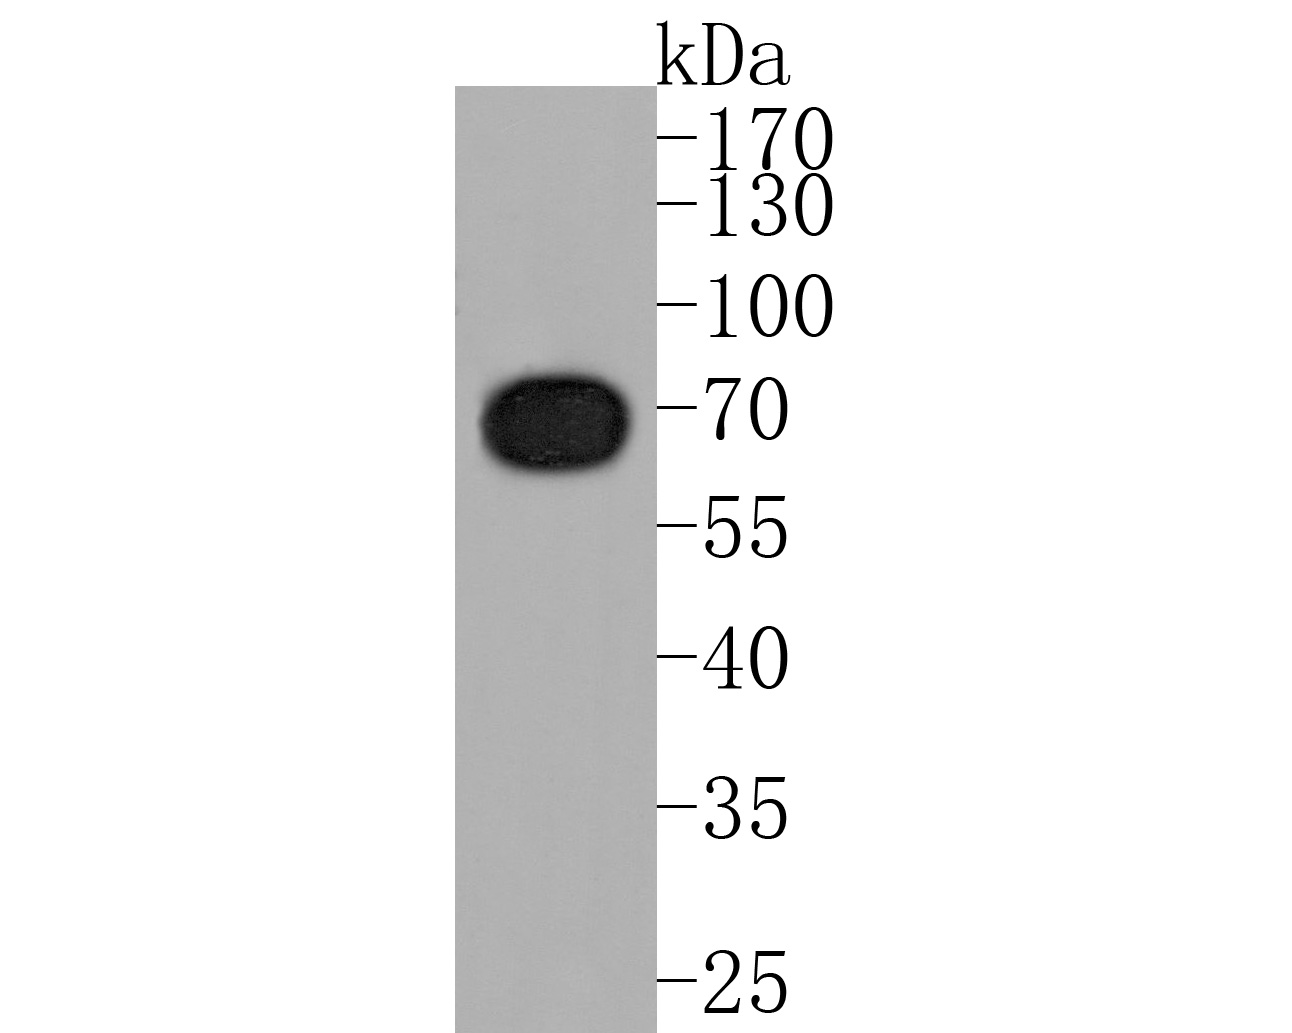 Western blot analysis of TUB on SH-SY5Y cell lysates. Proteins were transferred to a PVDF membrane and blocked with 5% BSA in PBS for 1 hour at room temperature. The primary antibody (HA720035, 1/500) was used in 5% BSA at room temperature for 2 hours. Goat Anti-Rabbit IgG - HRP Secondary Antibody (HA1001) at 1:200,000 dilution was used for 1 hour at room temperature.